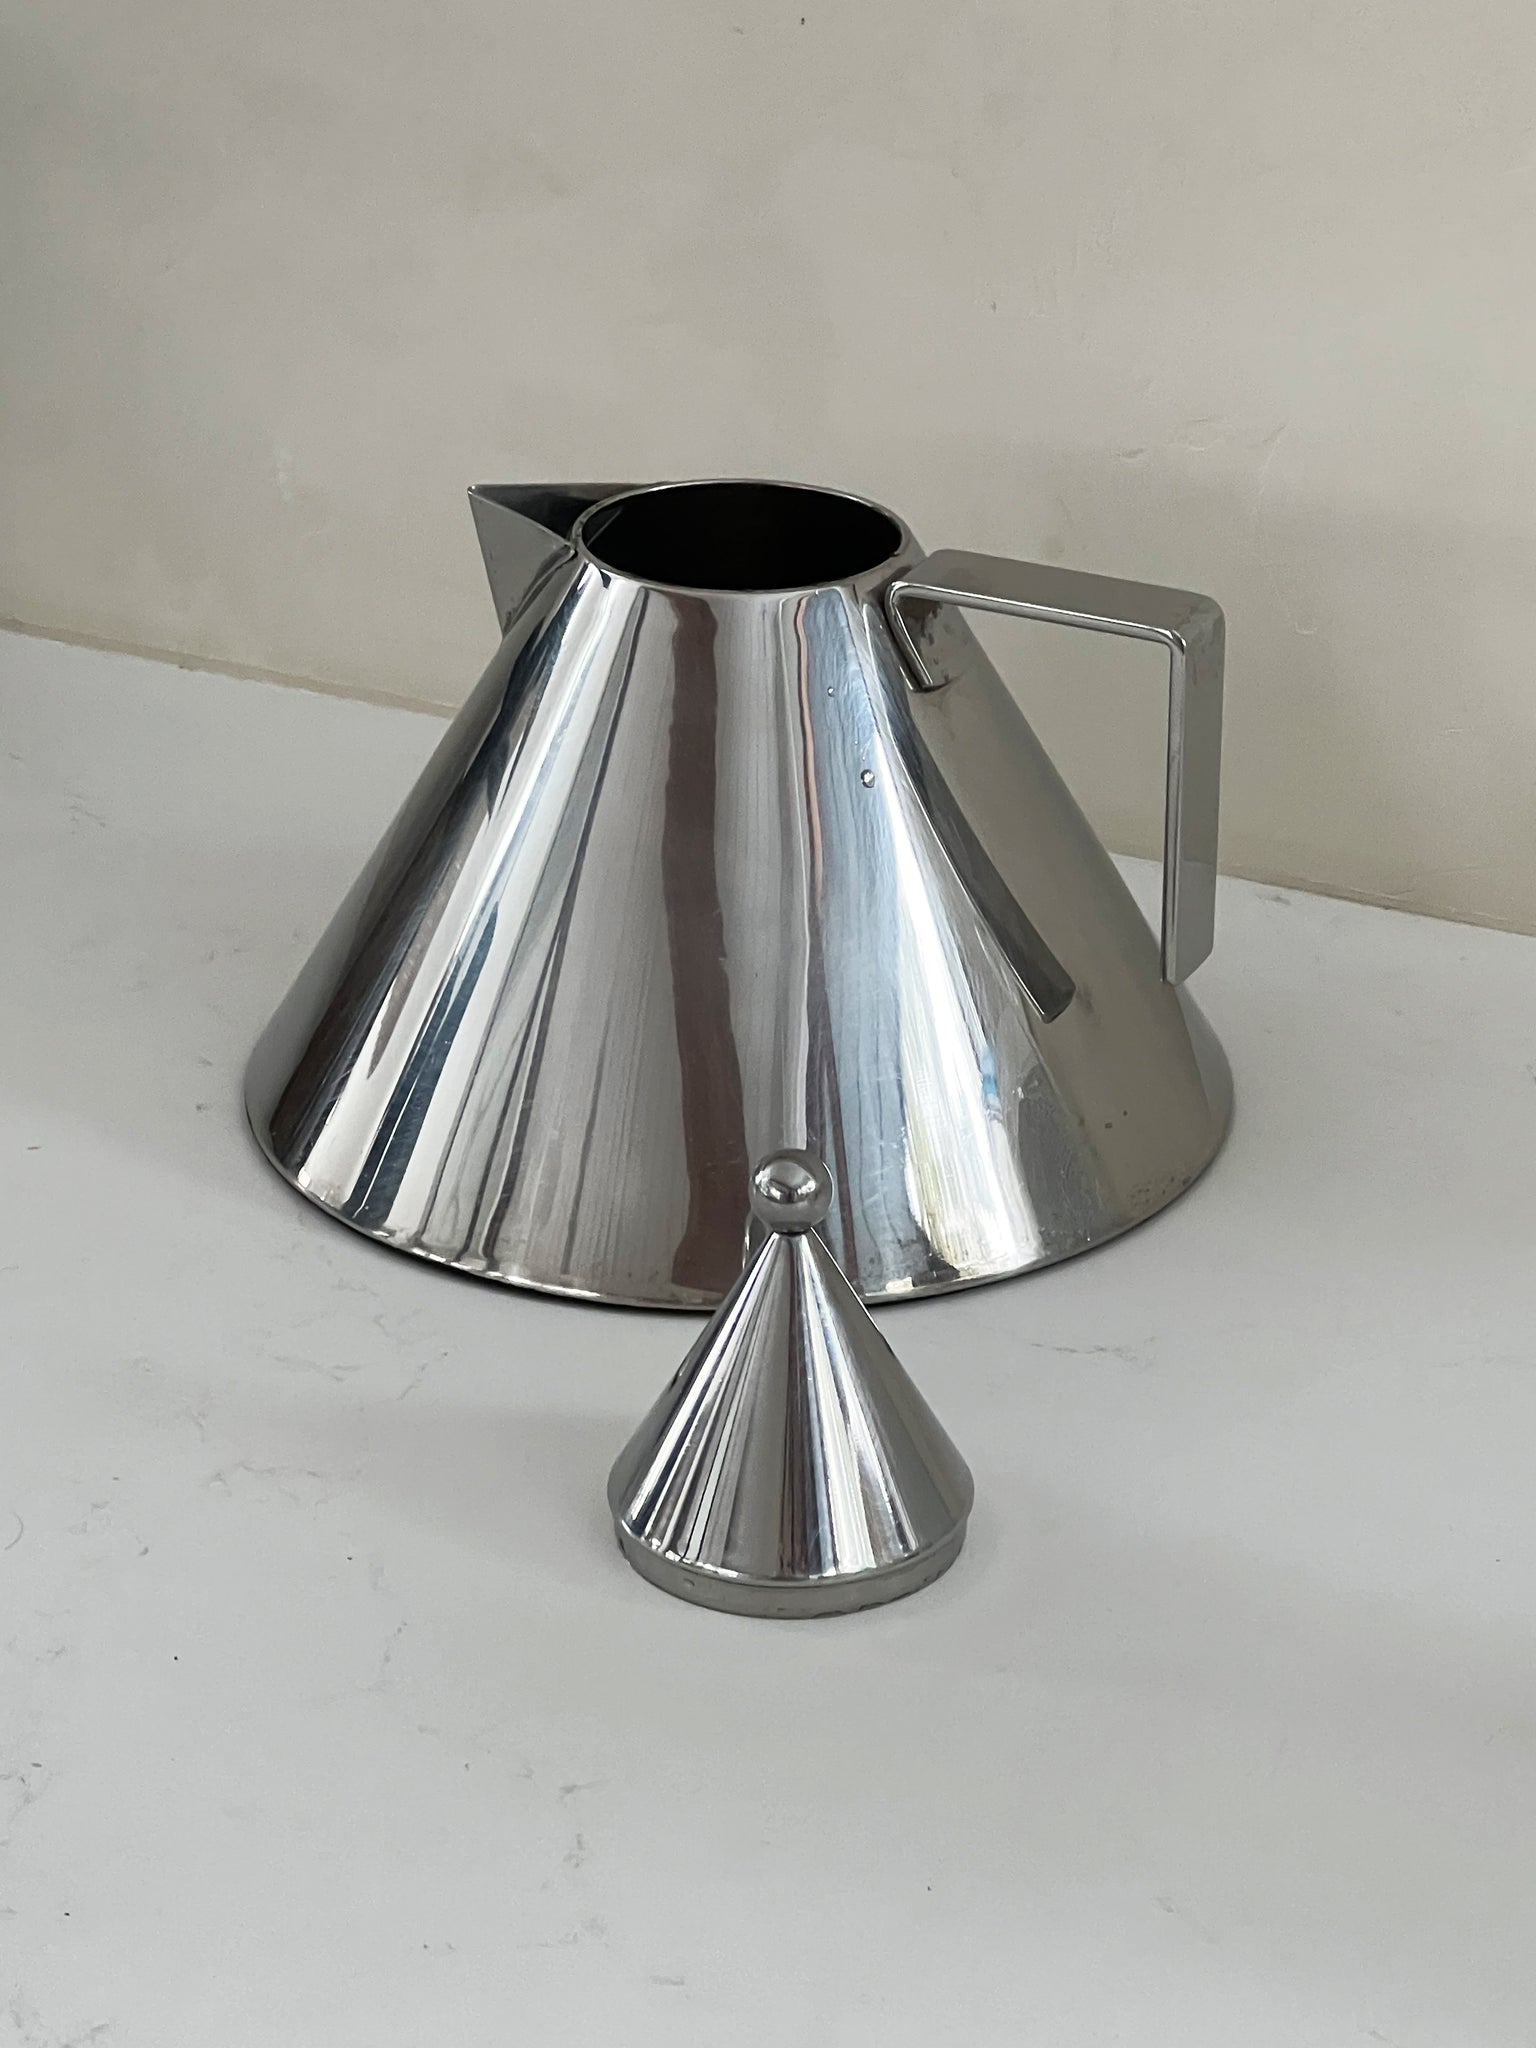 Vintage Il Conico kettle in stainless steel by Aldo Rossi for Alessi.